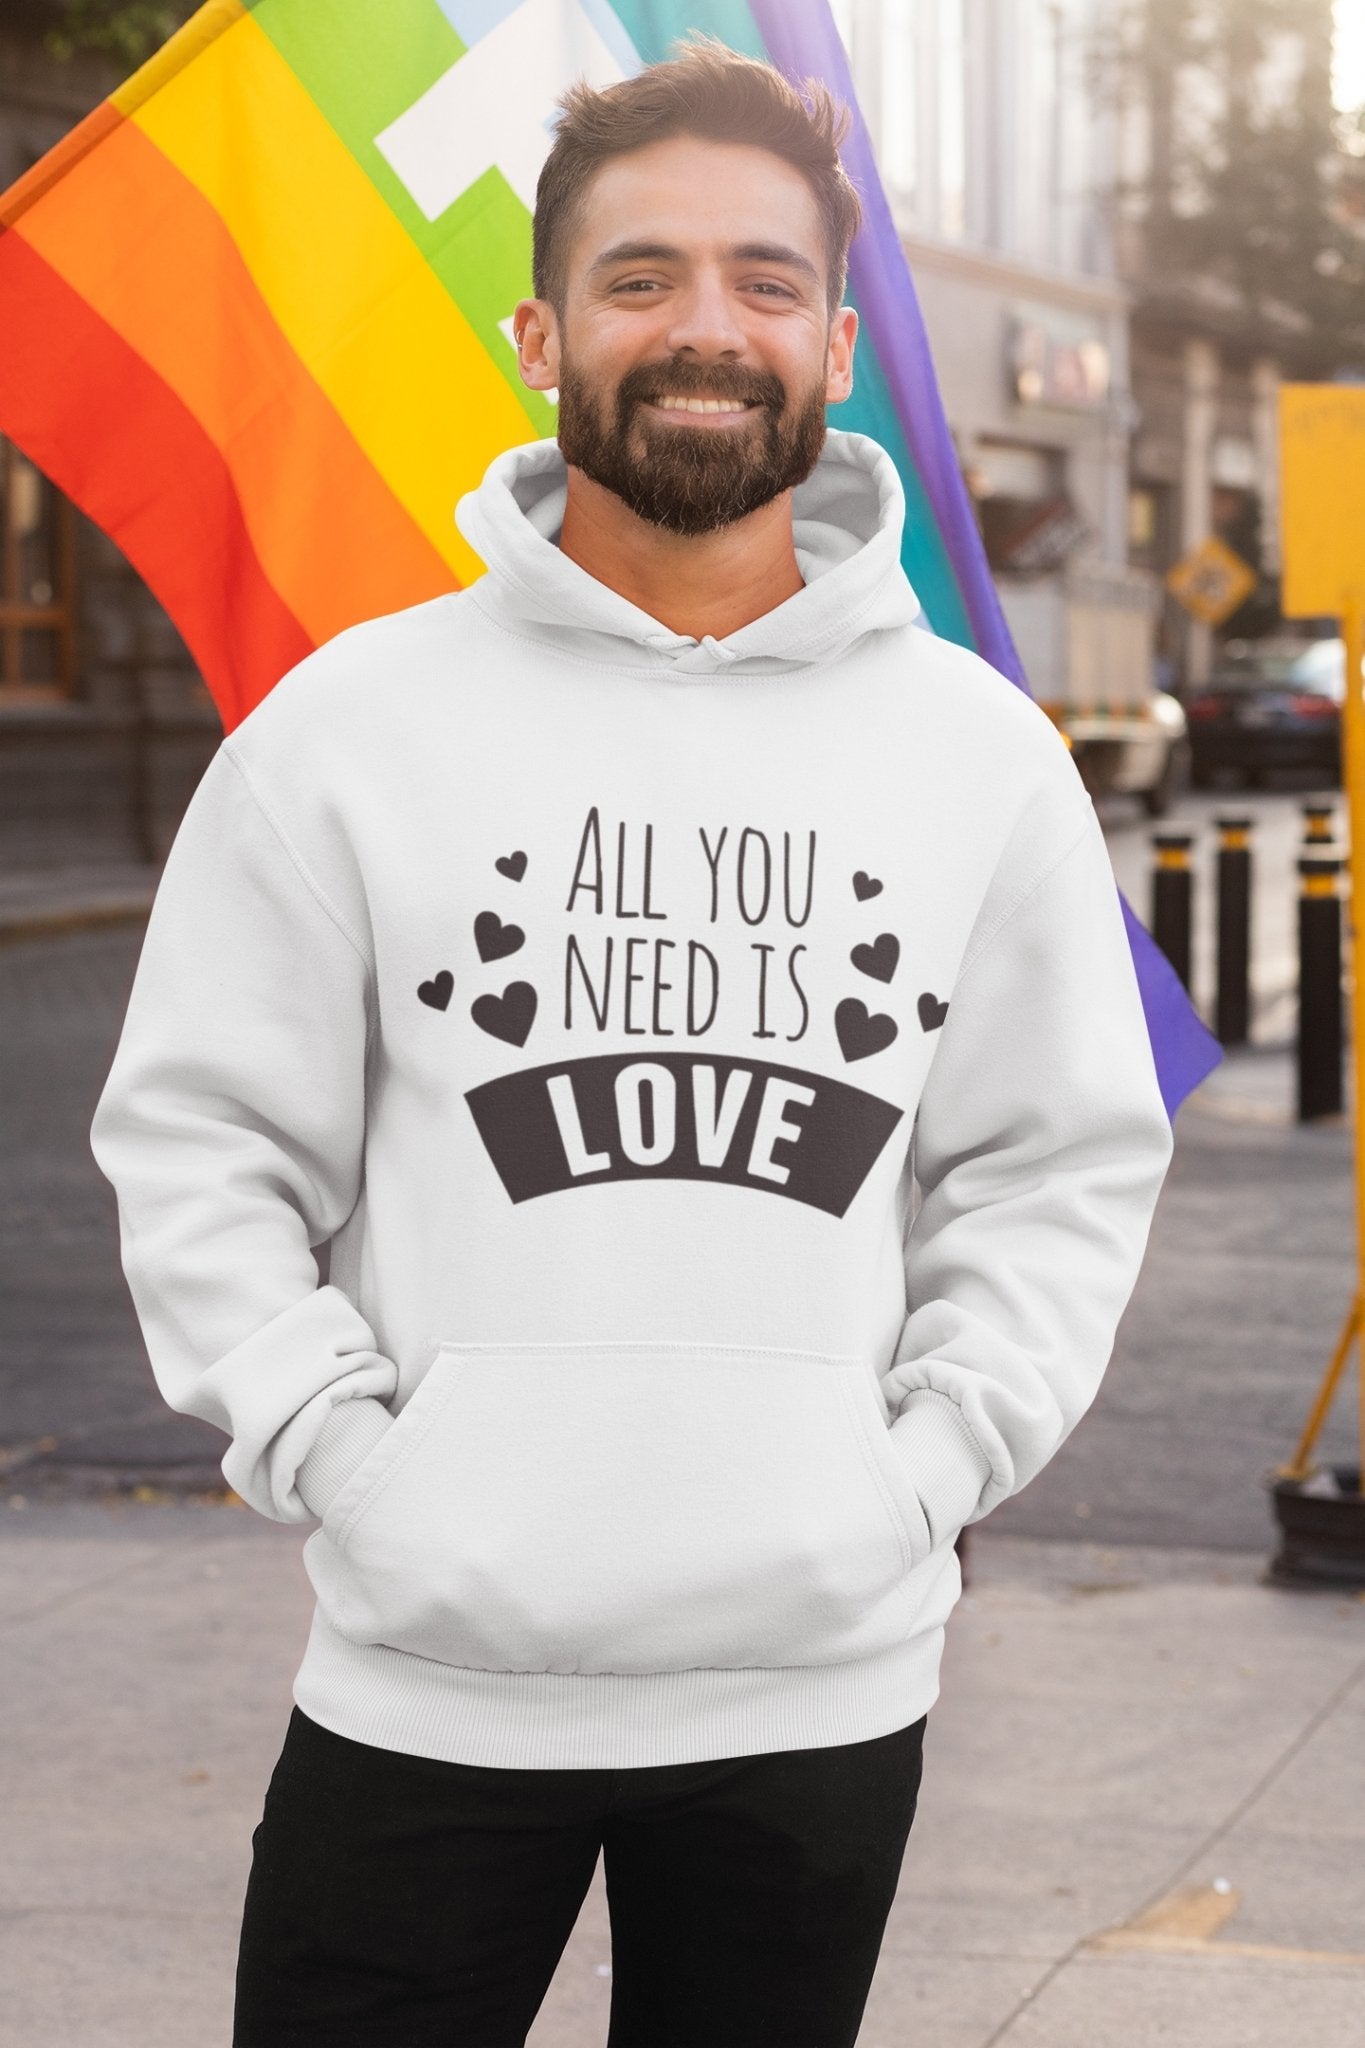 All you need is love Men Hoodies-FunkyTradition - FunkyTradition